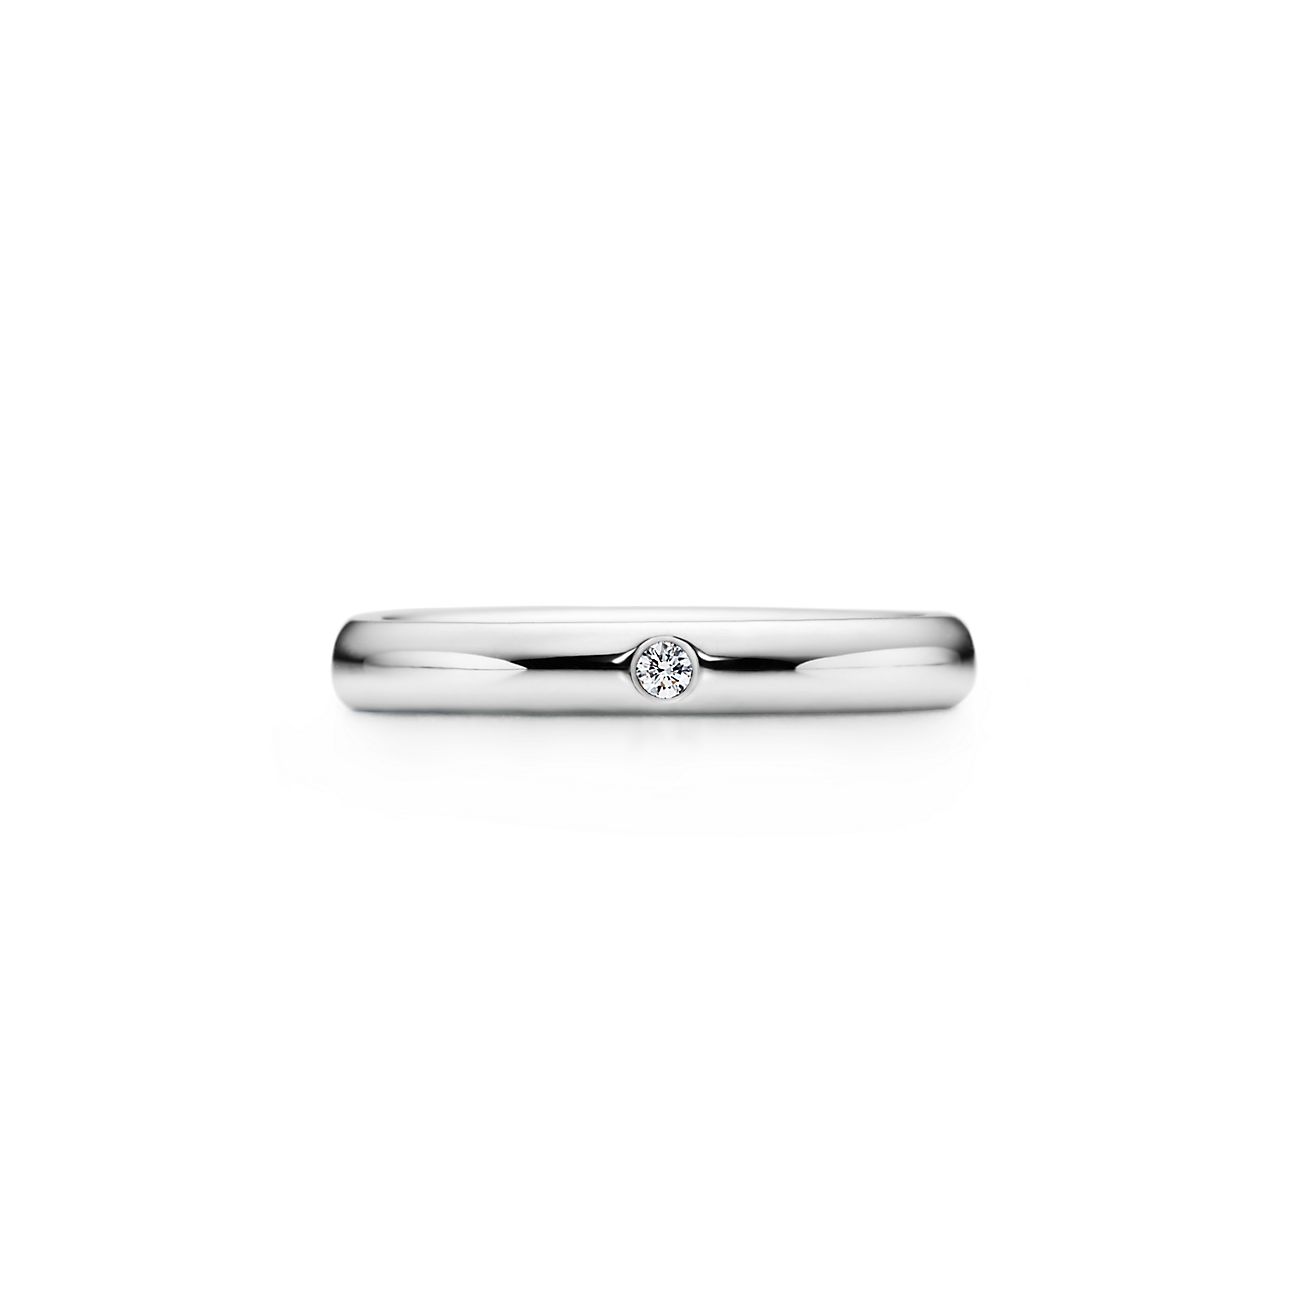 Elsa Peretti® band ring with a diamond in platinum. | Tiffany & Co.